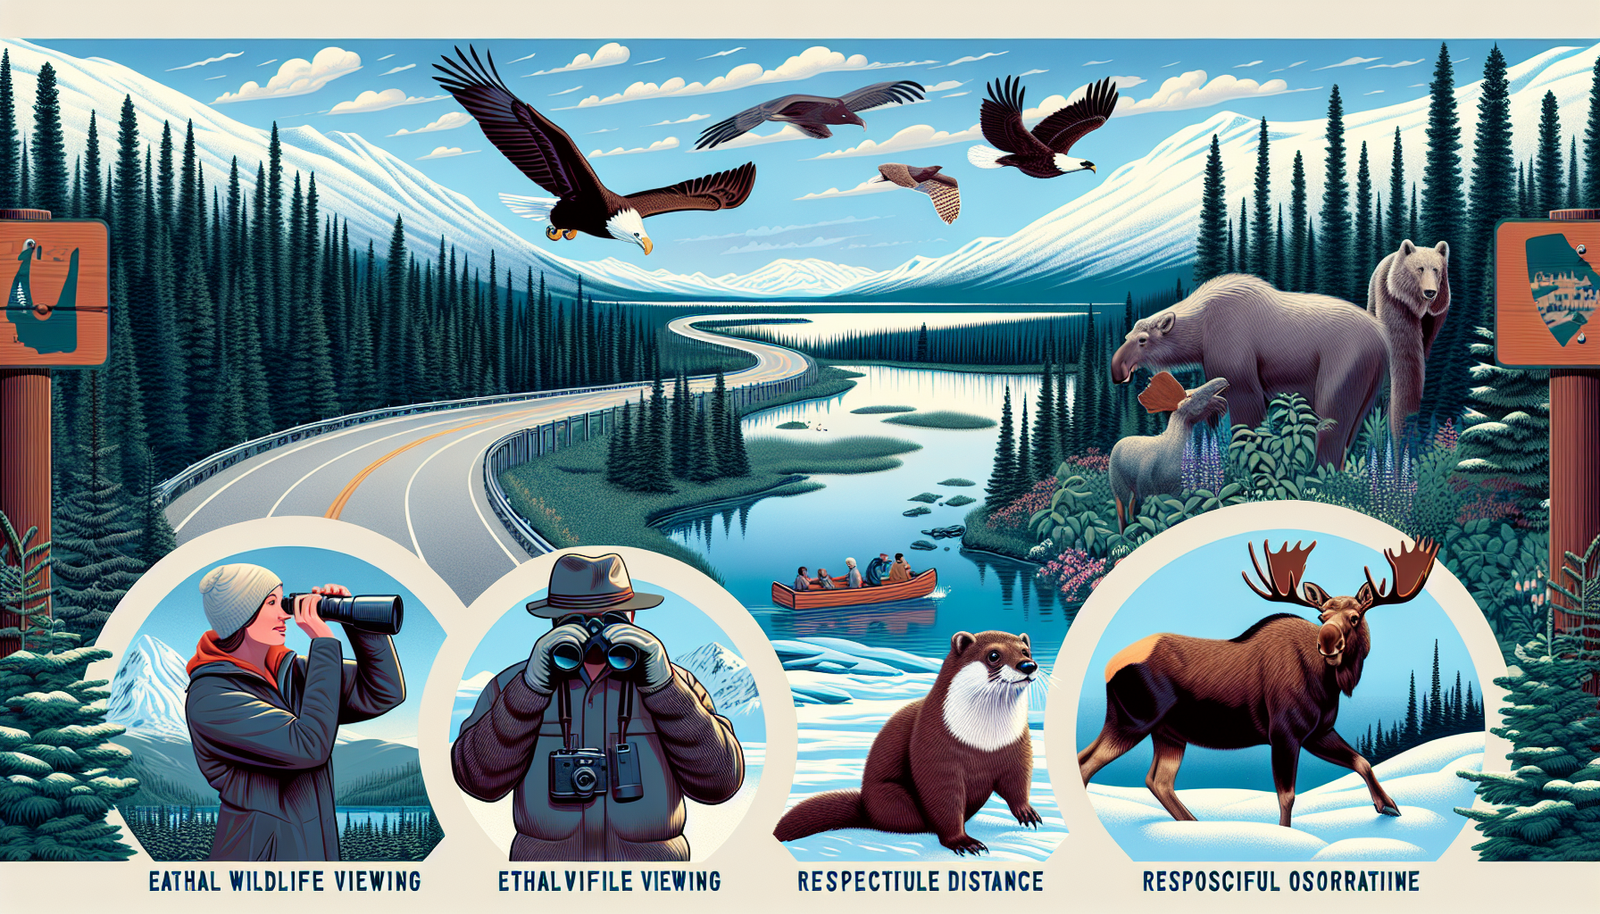 Ethical Wildlife Viewing along the Alaska Highway